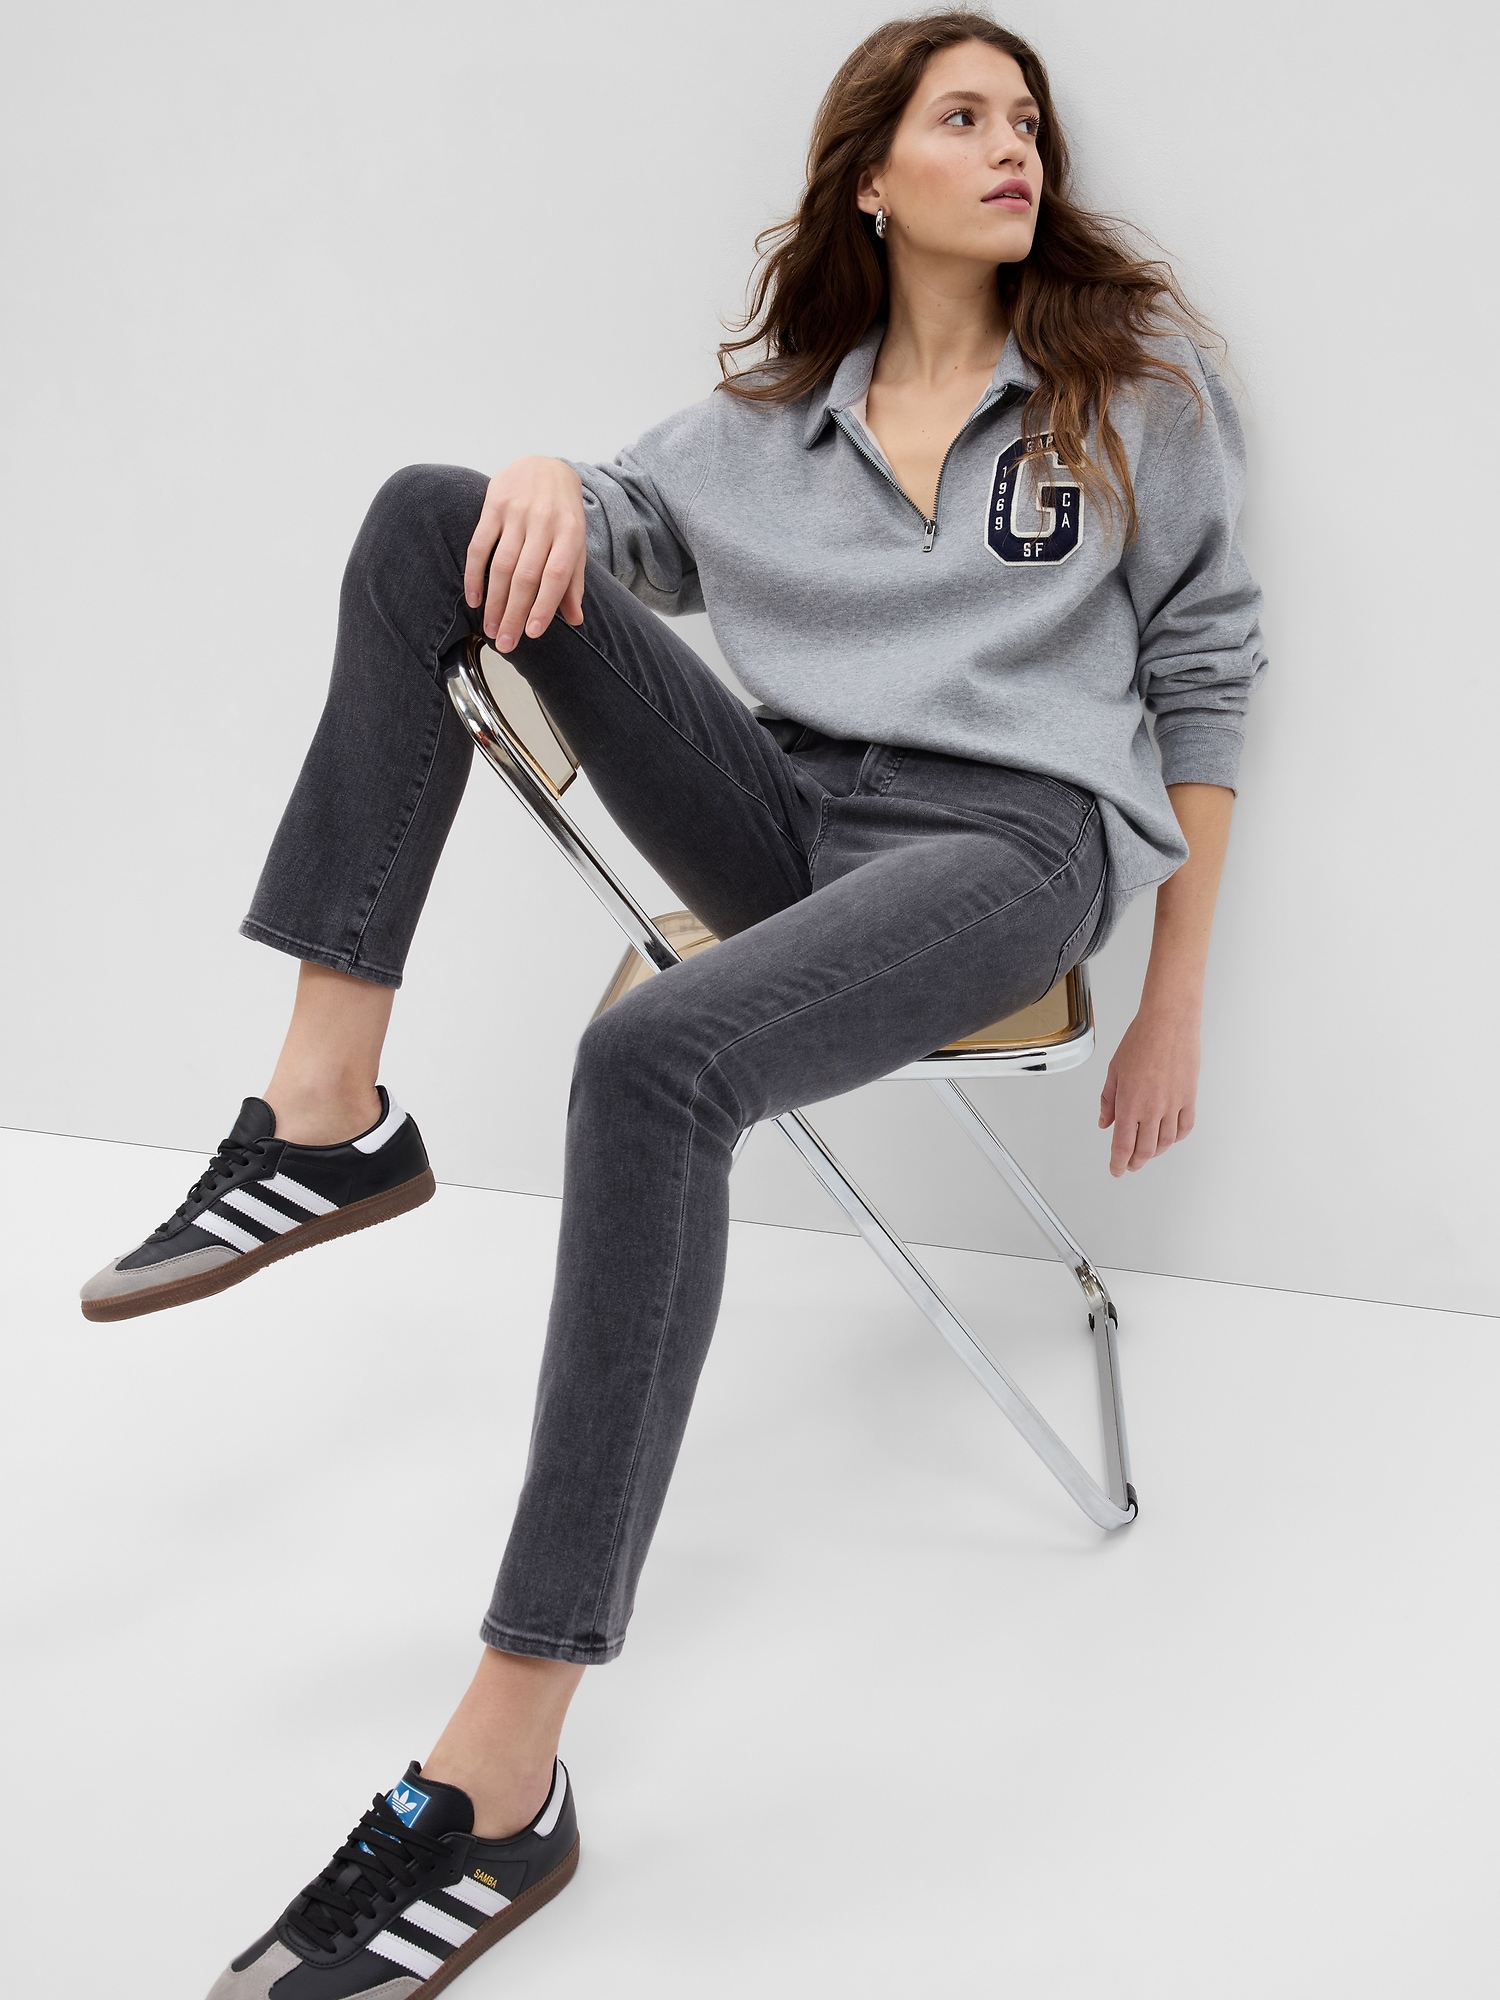 GAP Jeans - Select from Latest Collection of GAP Jeans